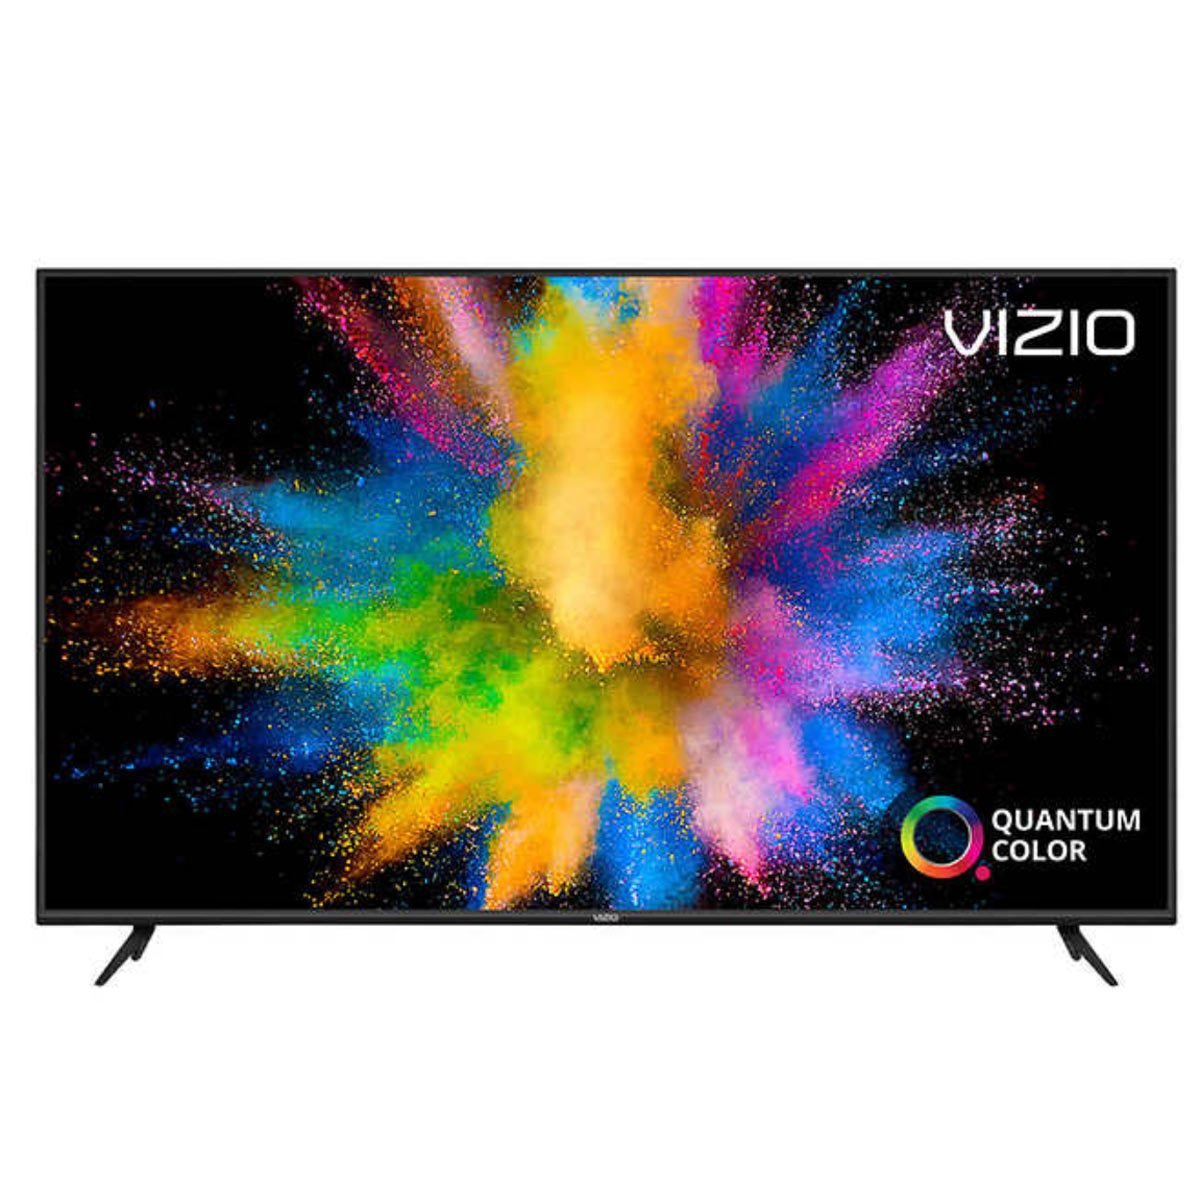 The Best Black Friday Deals on TVs for 2019